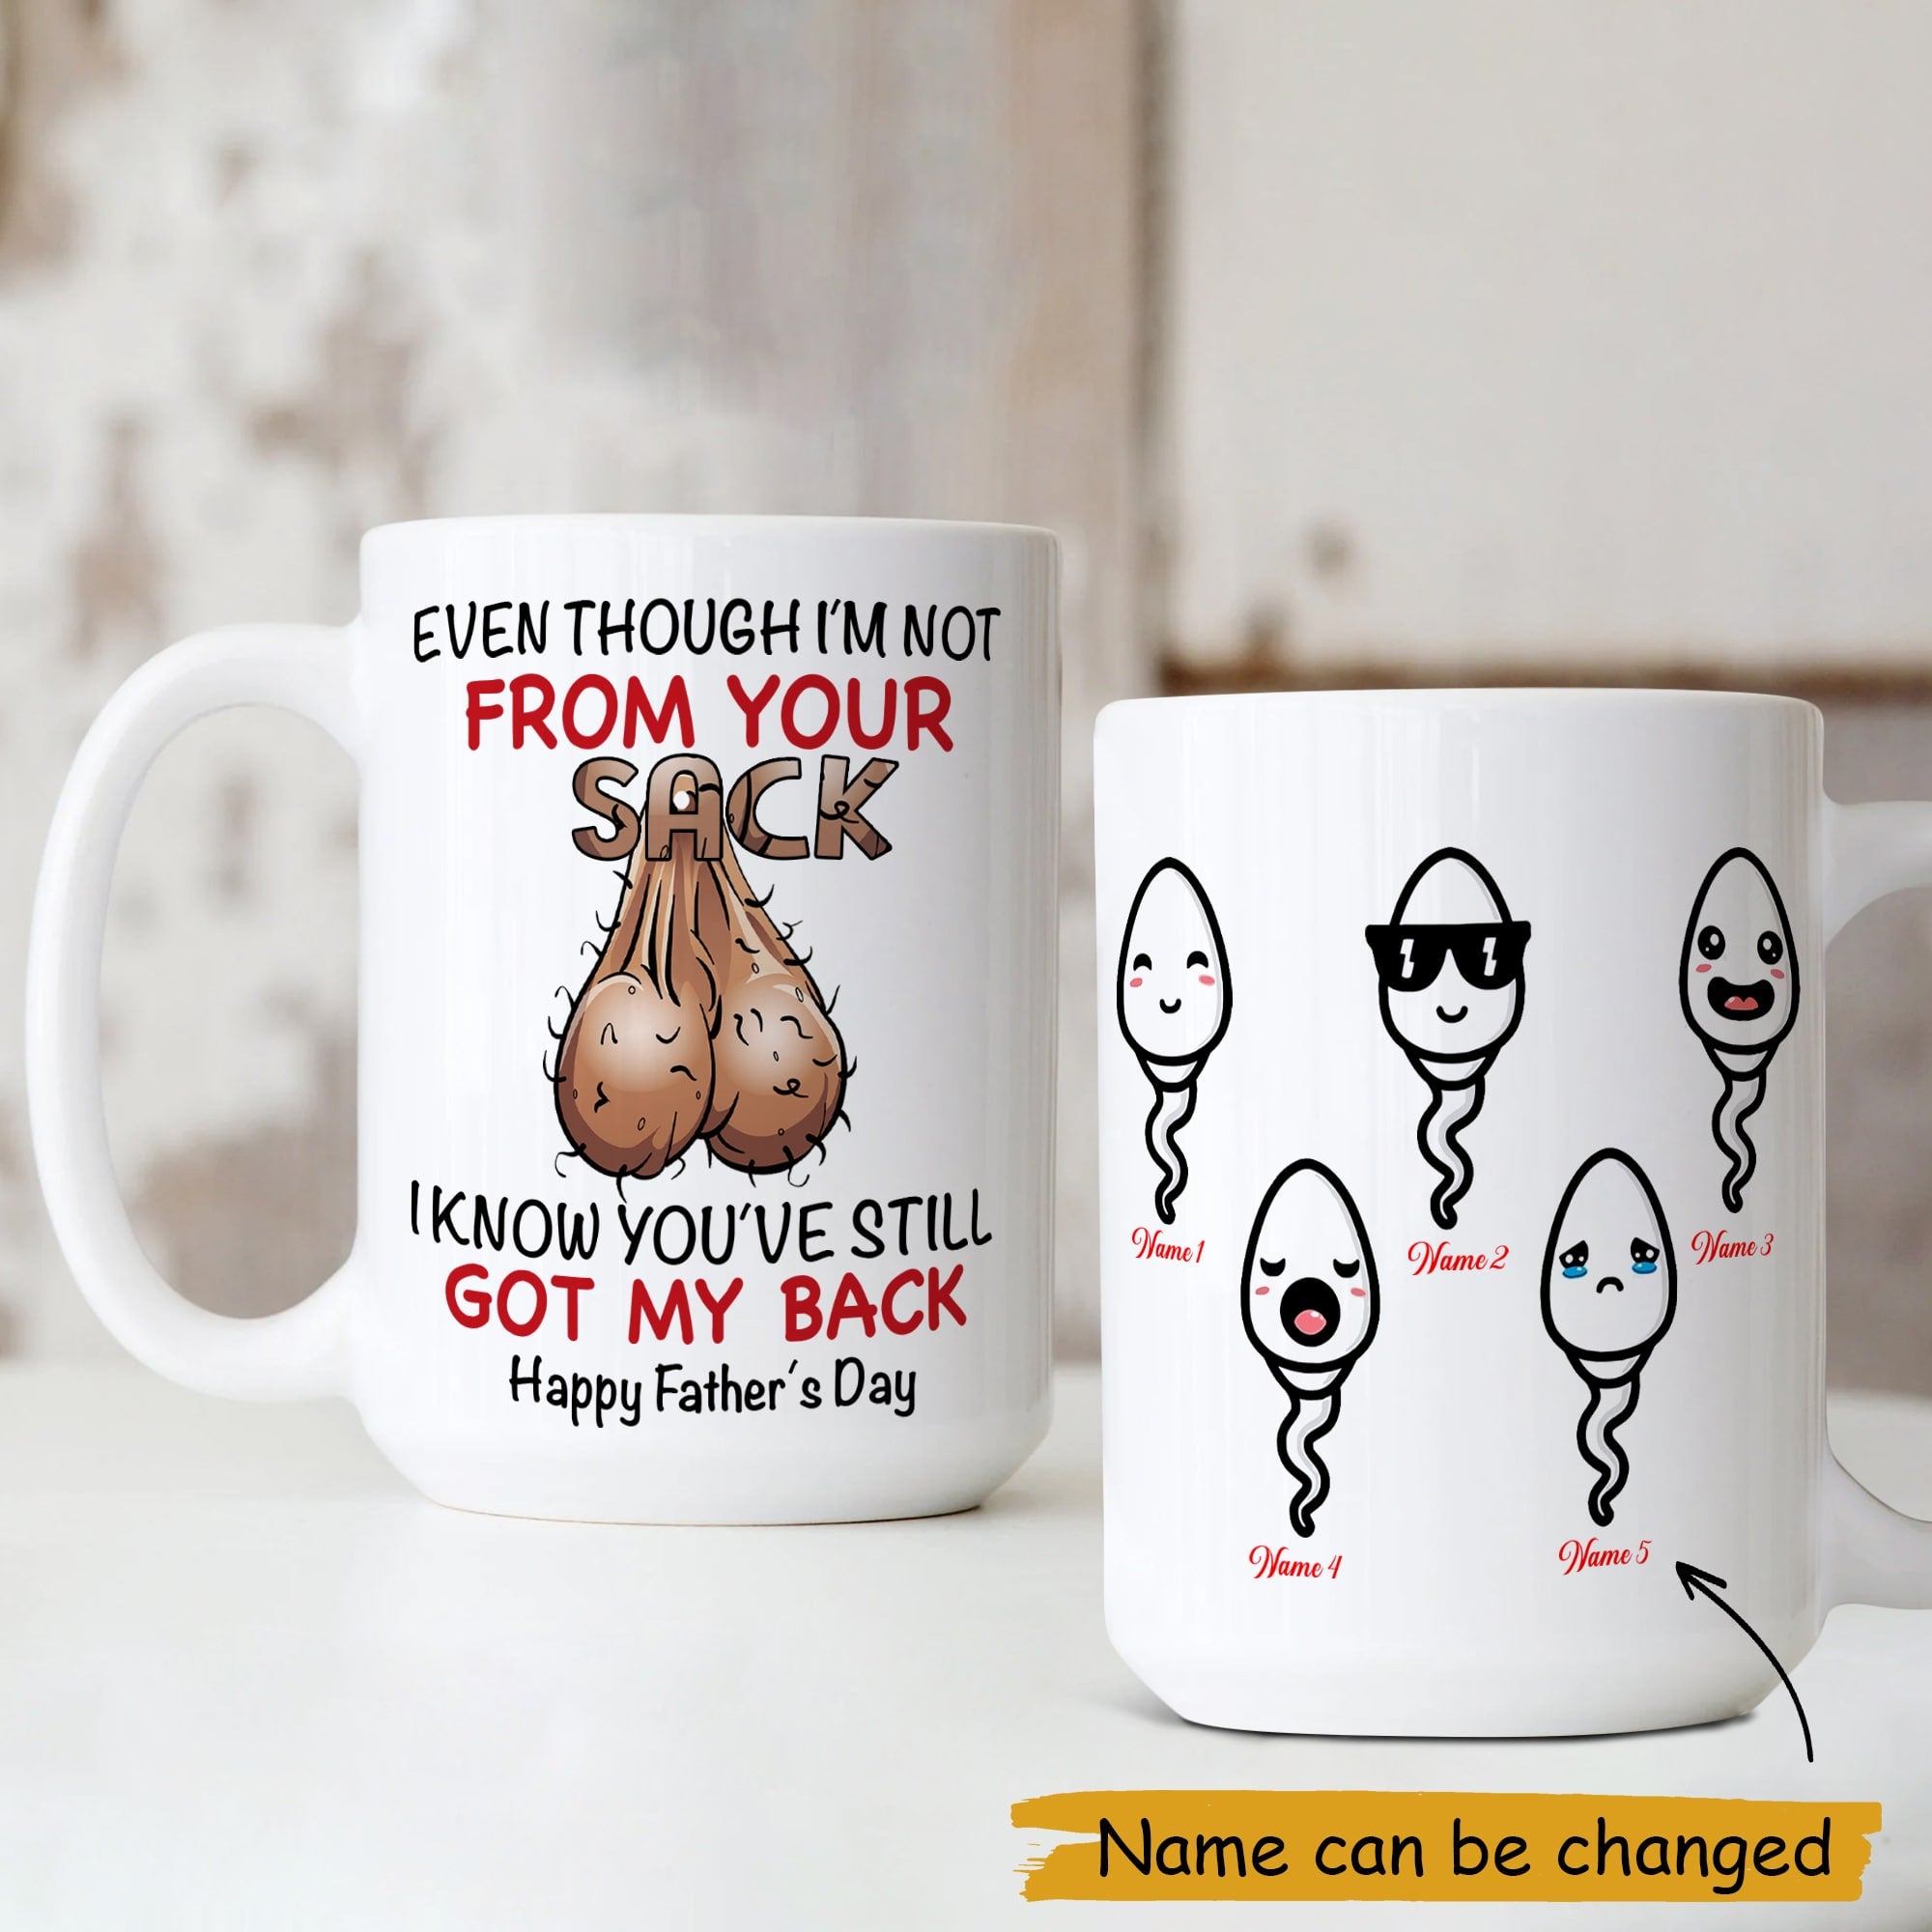 funny mug for happy father's day